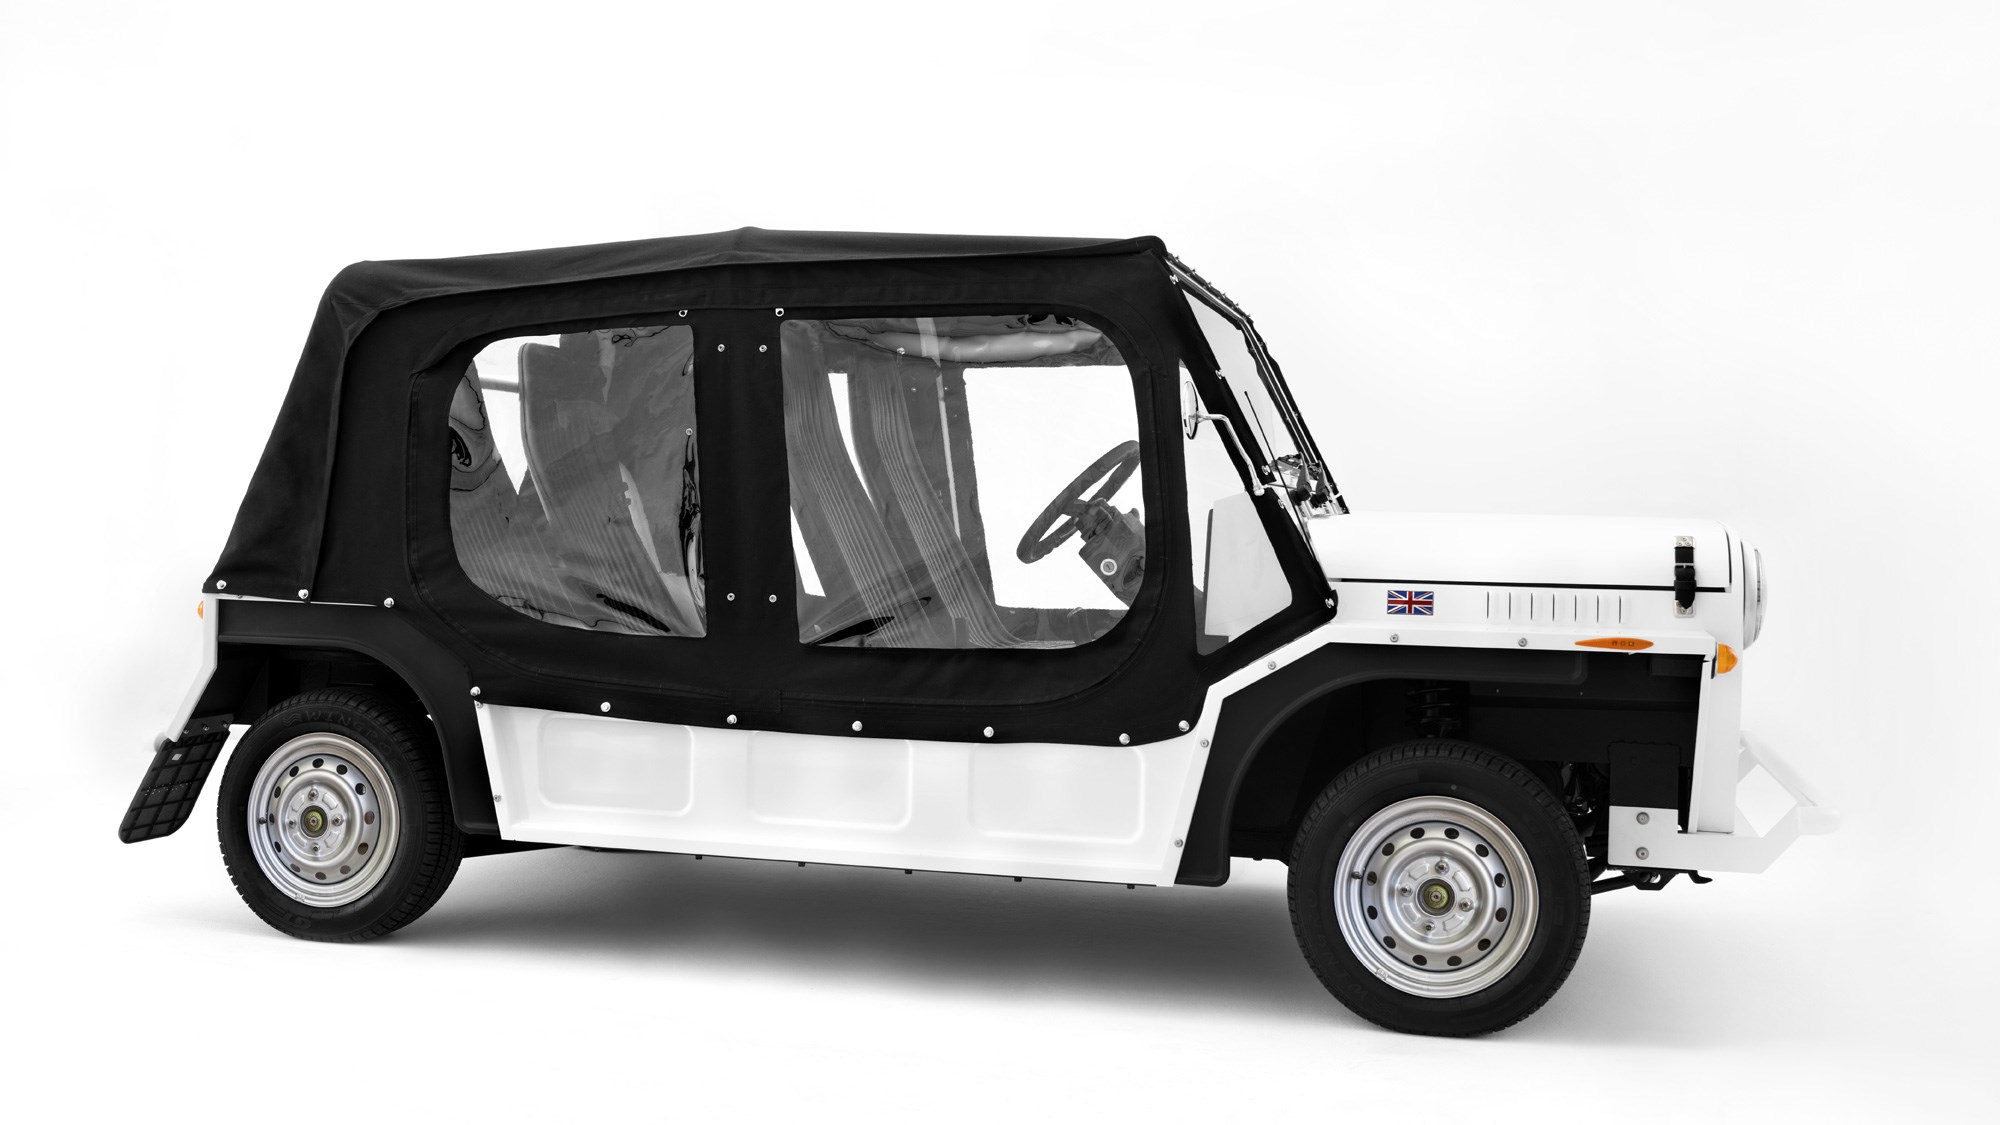 The Moke is back – classic British motoring icon now on sale in the UK  again